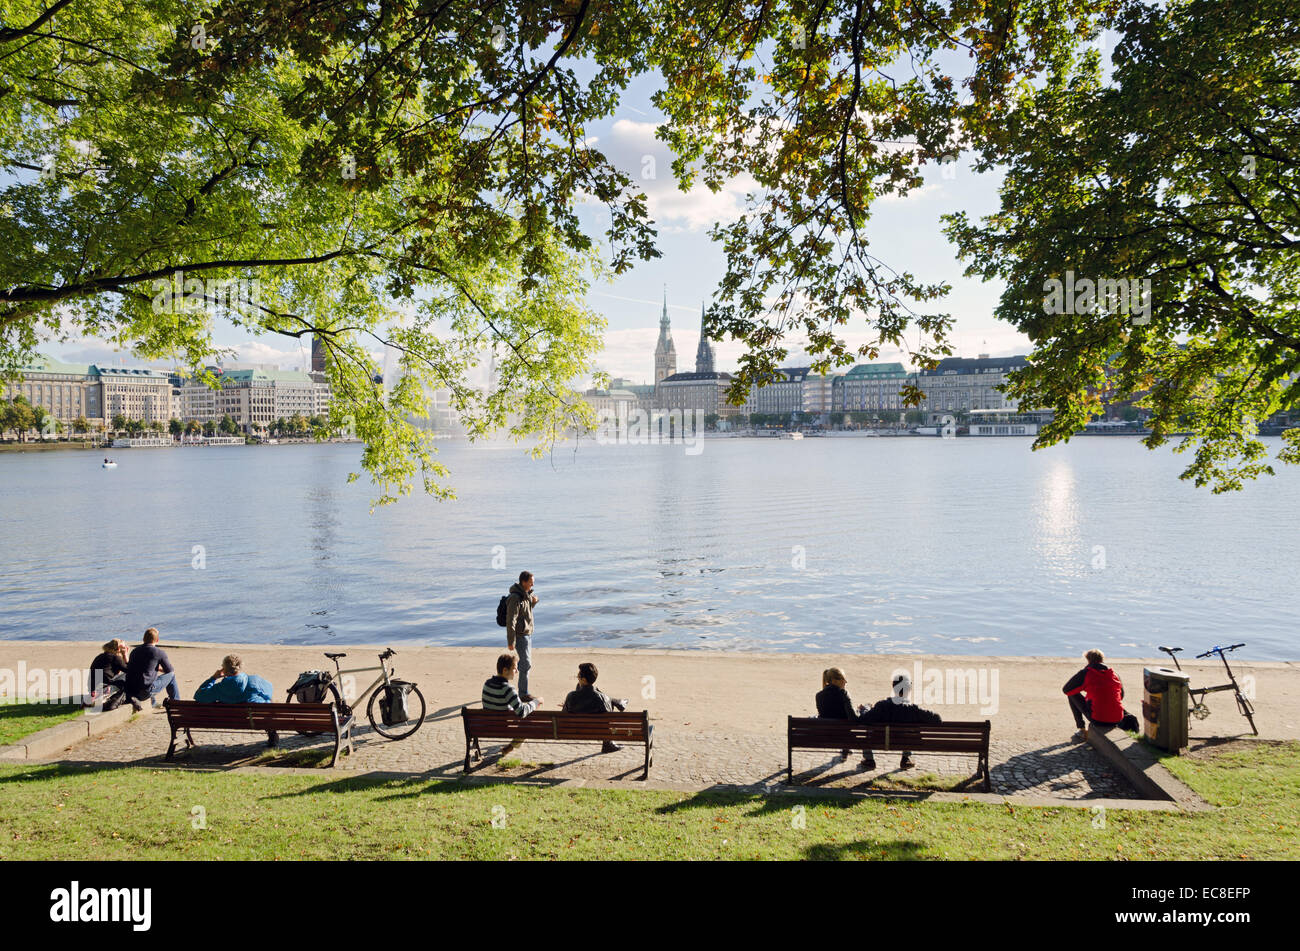 HAMBURG, GERMANY - SEPTEMBER 26: A group of young people seated on benches at the edge of Lake Alster on September 26, 2013, in Stock Photo